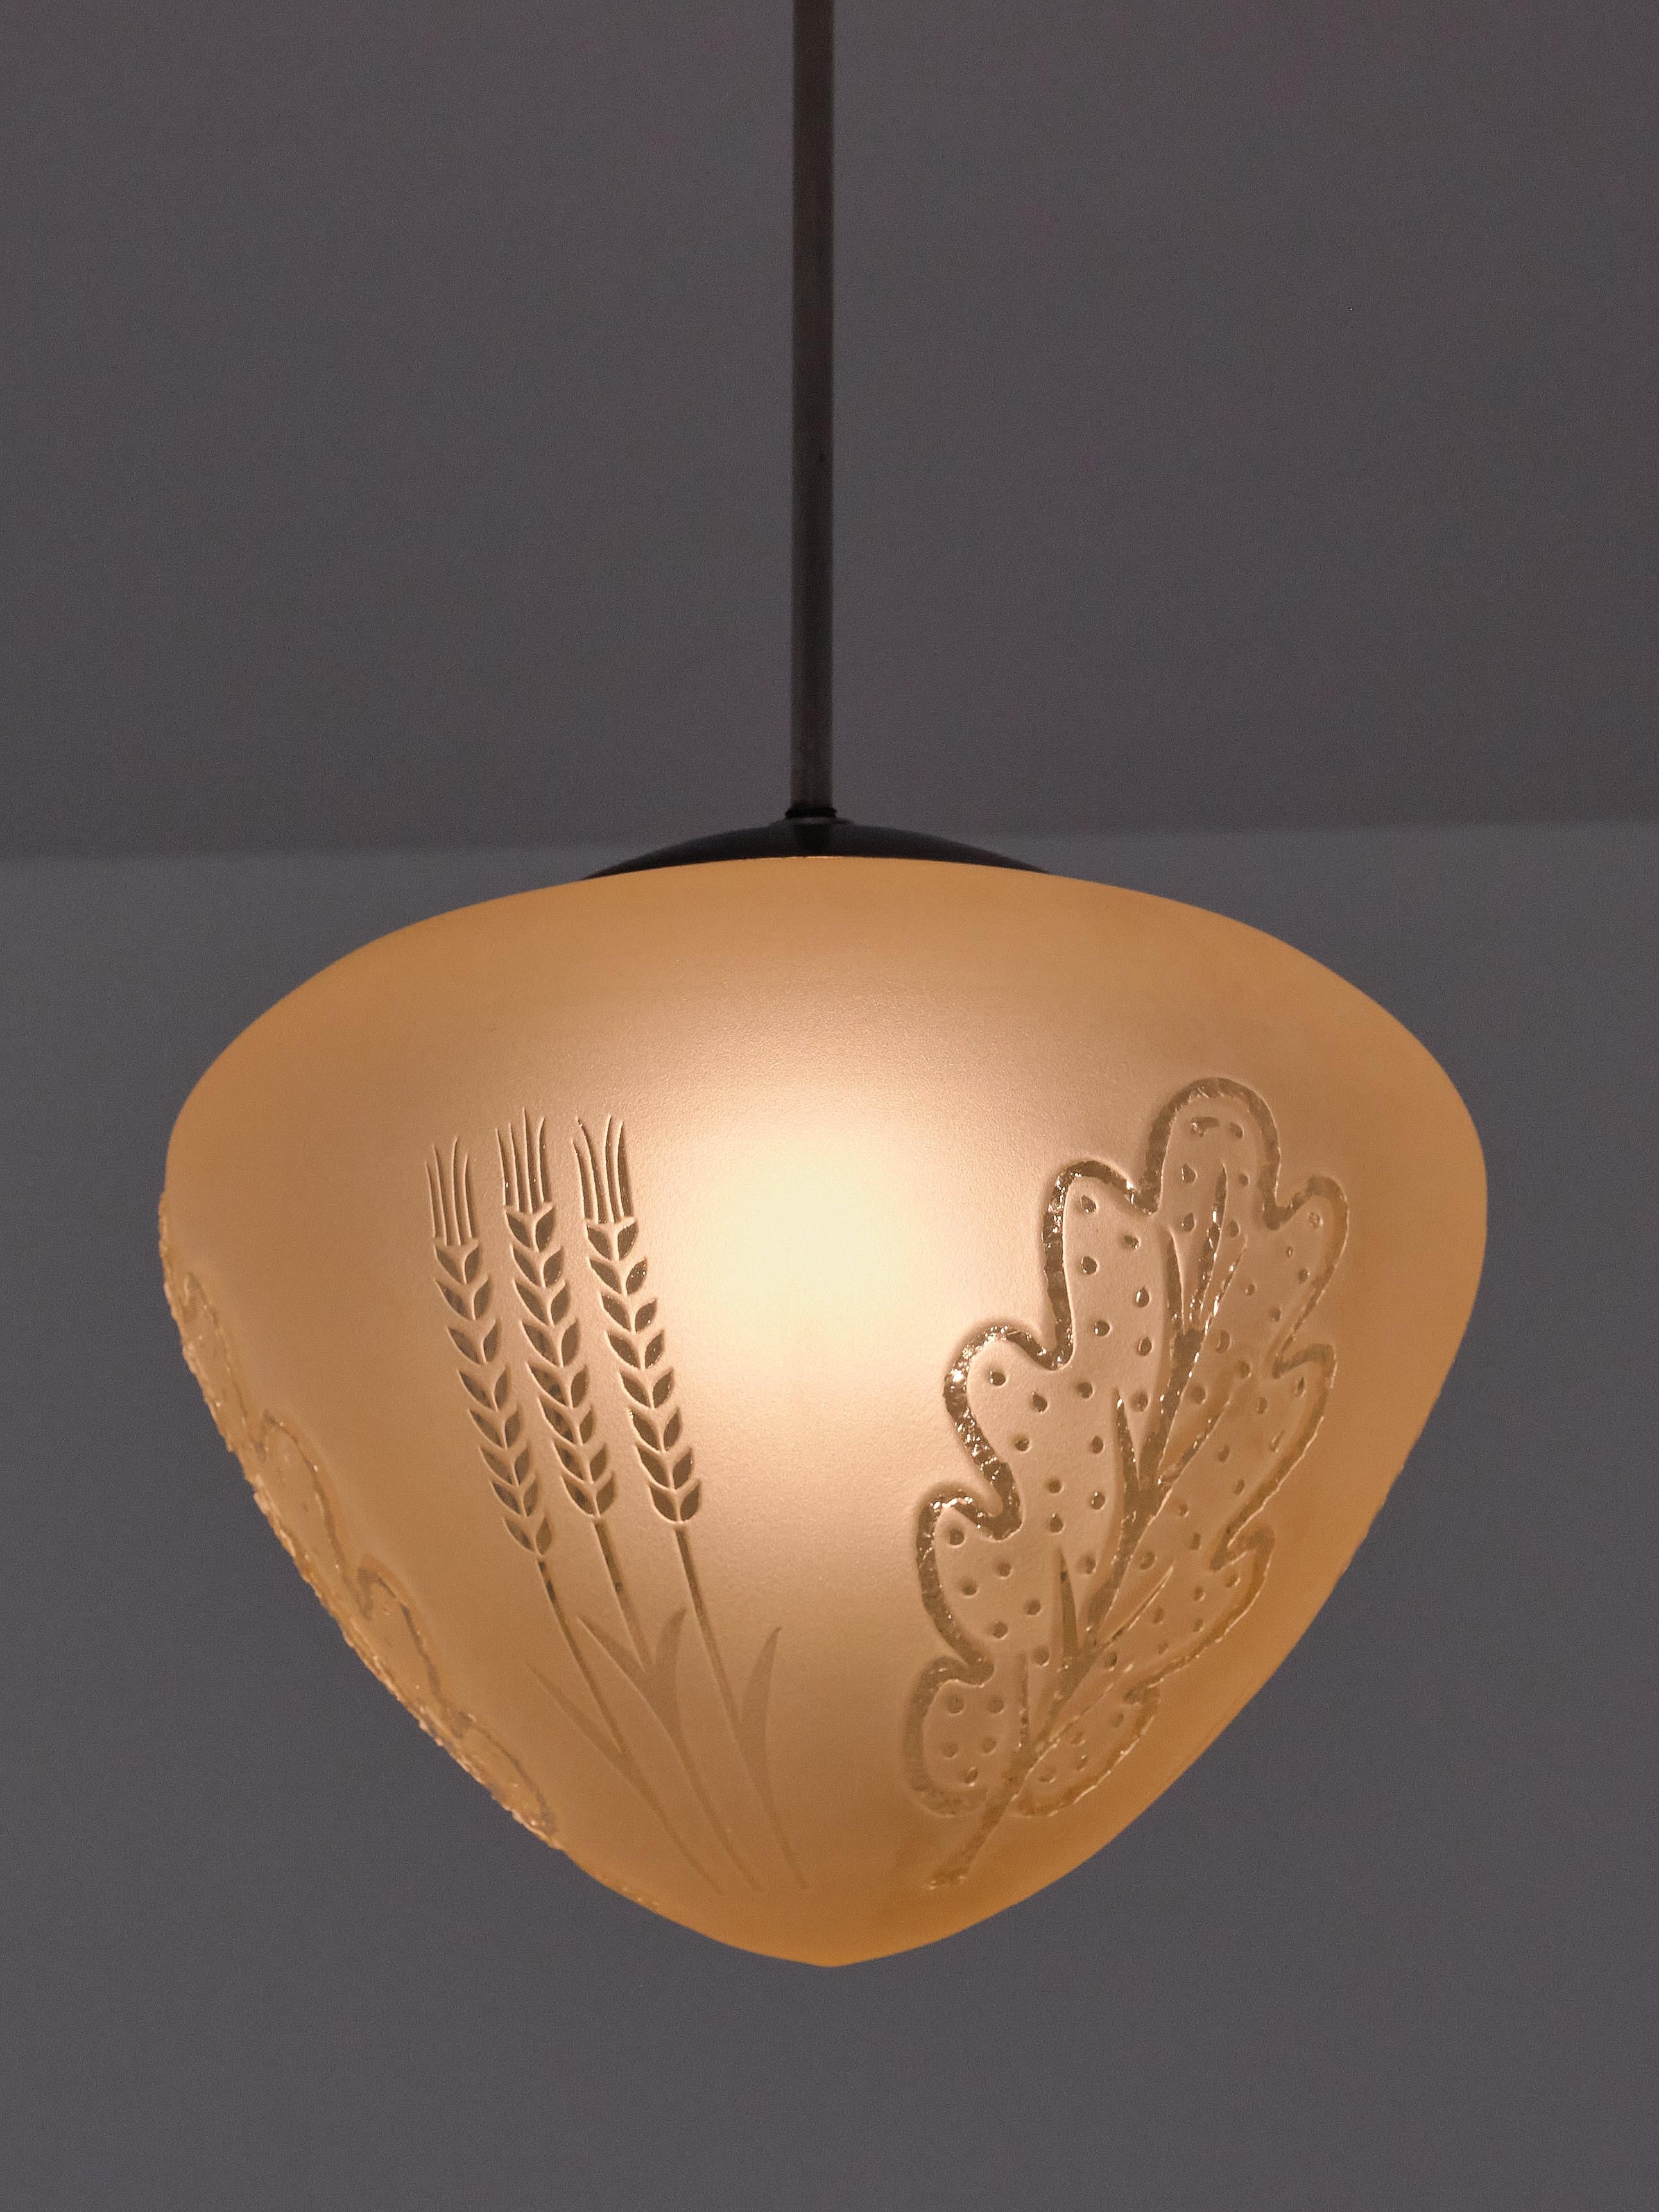 Edward Hald Attributed Pendant Lamp, Decorated Glass, Orrefors, Sweden, 1930s For Sale 4